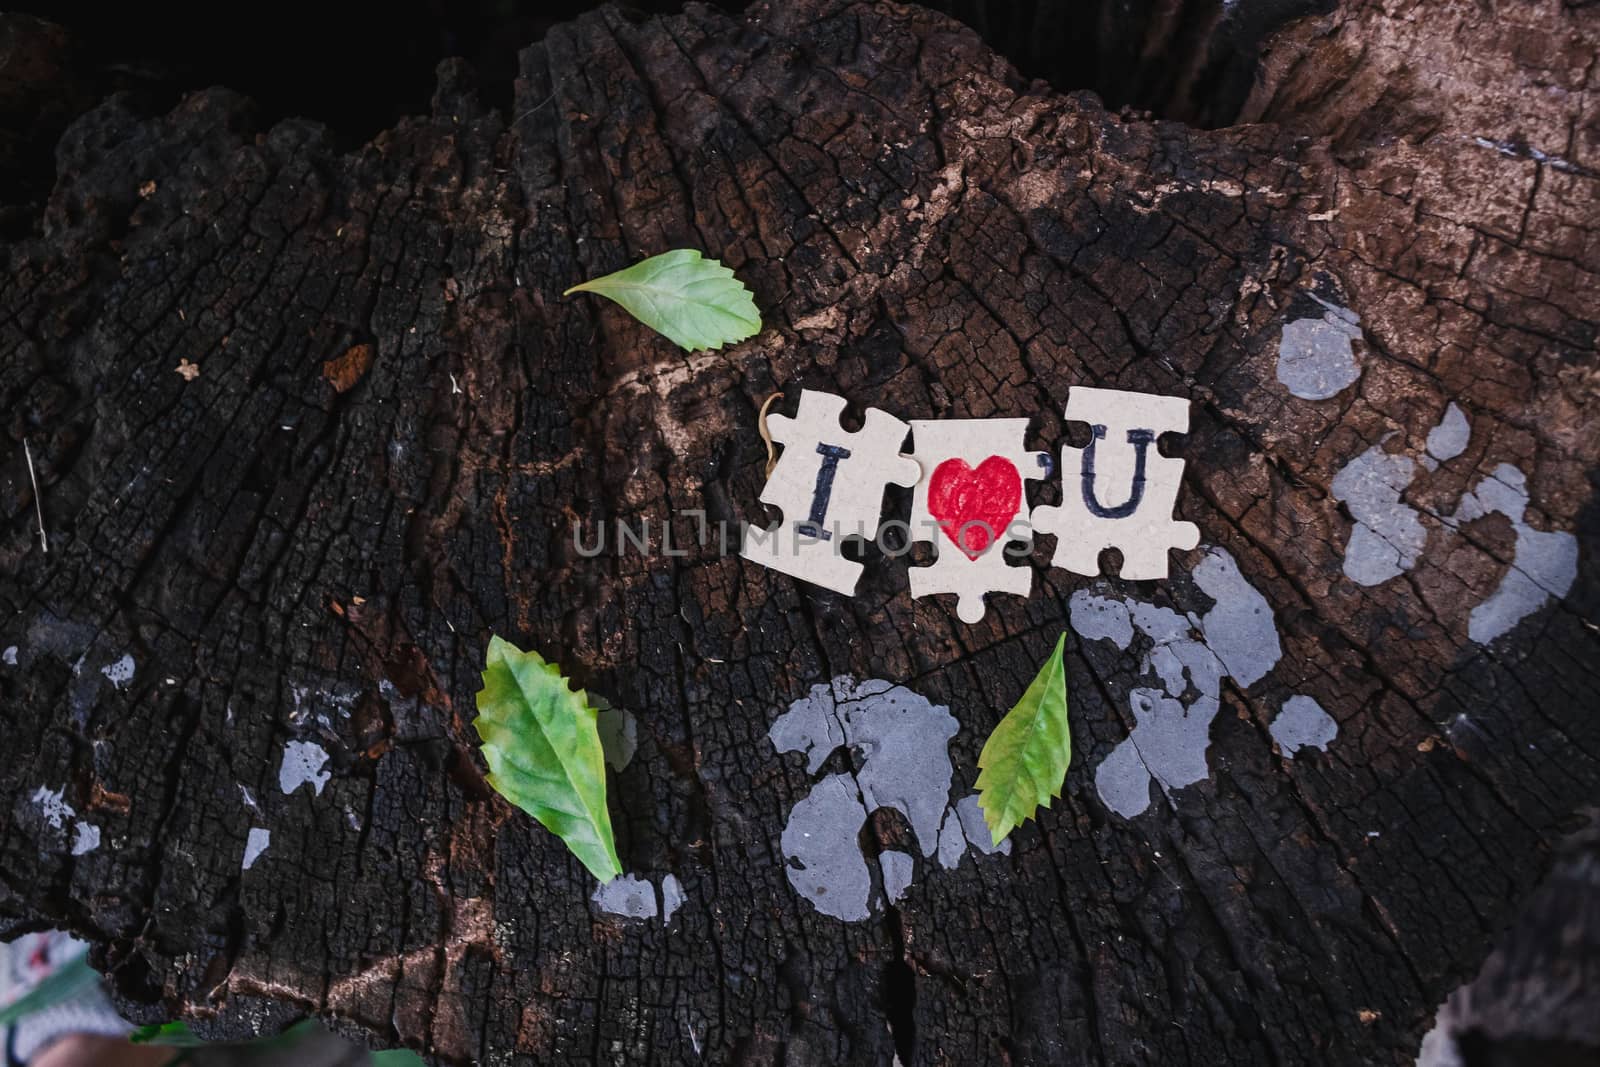 A picture of a paper jigsaw put on a tree stump and write that I by ToonPhotoClub